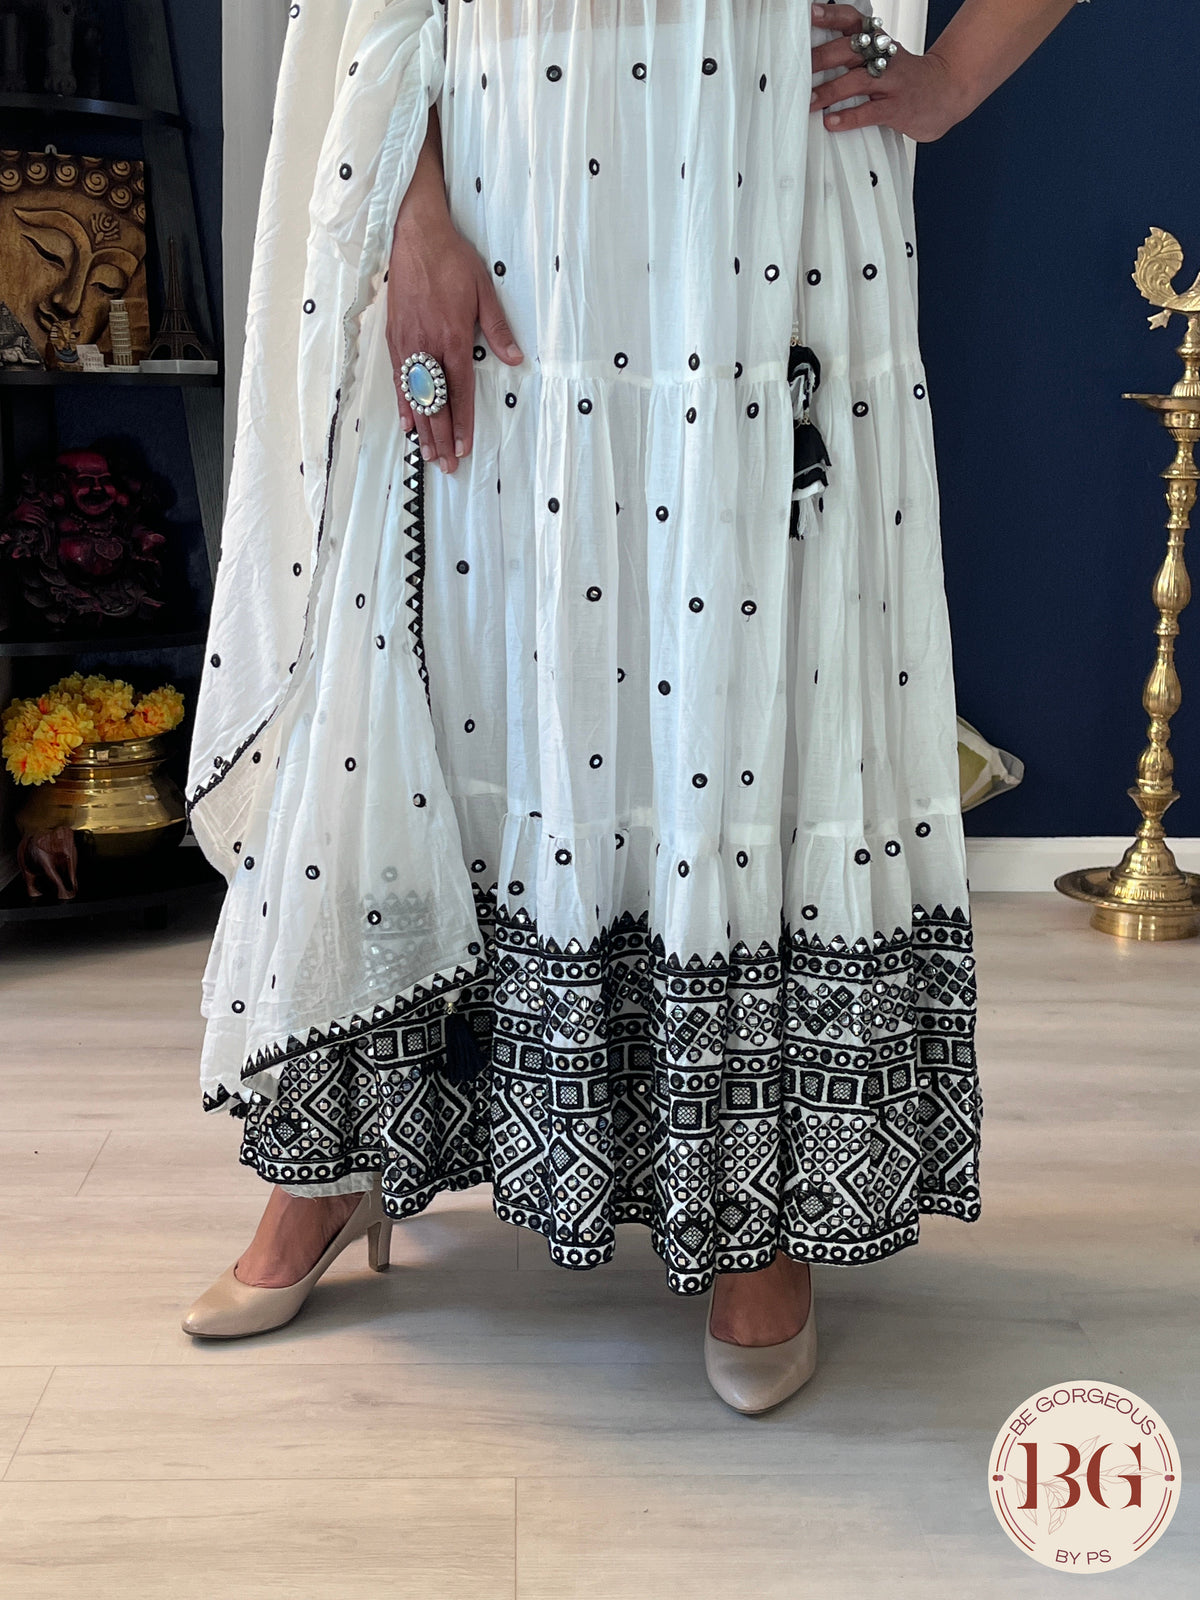 2-piece anarkali set with its intricate foil mirror work on soft mul cotton